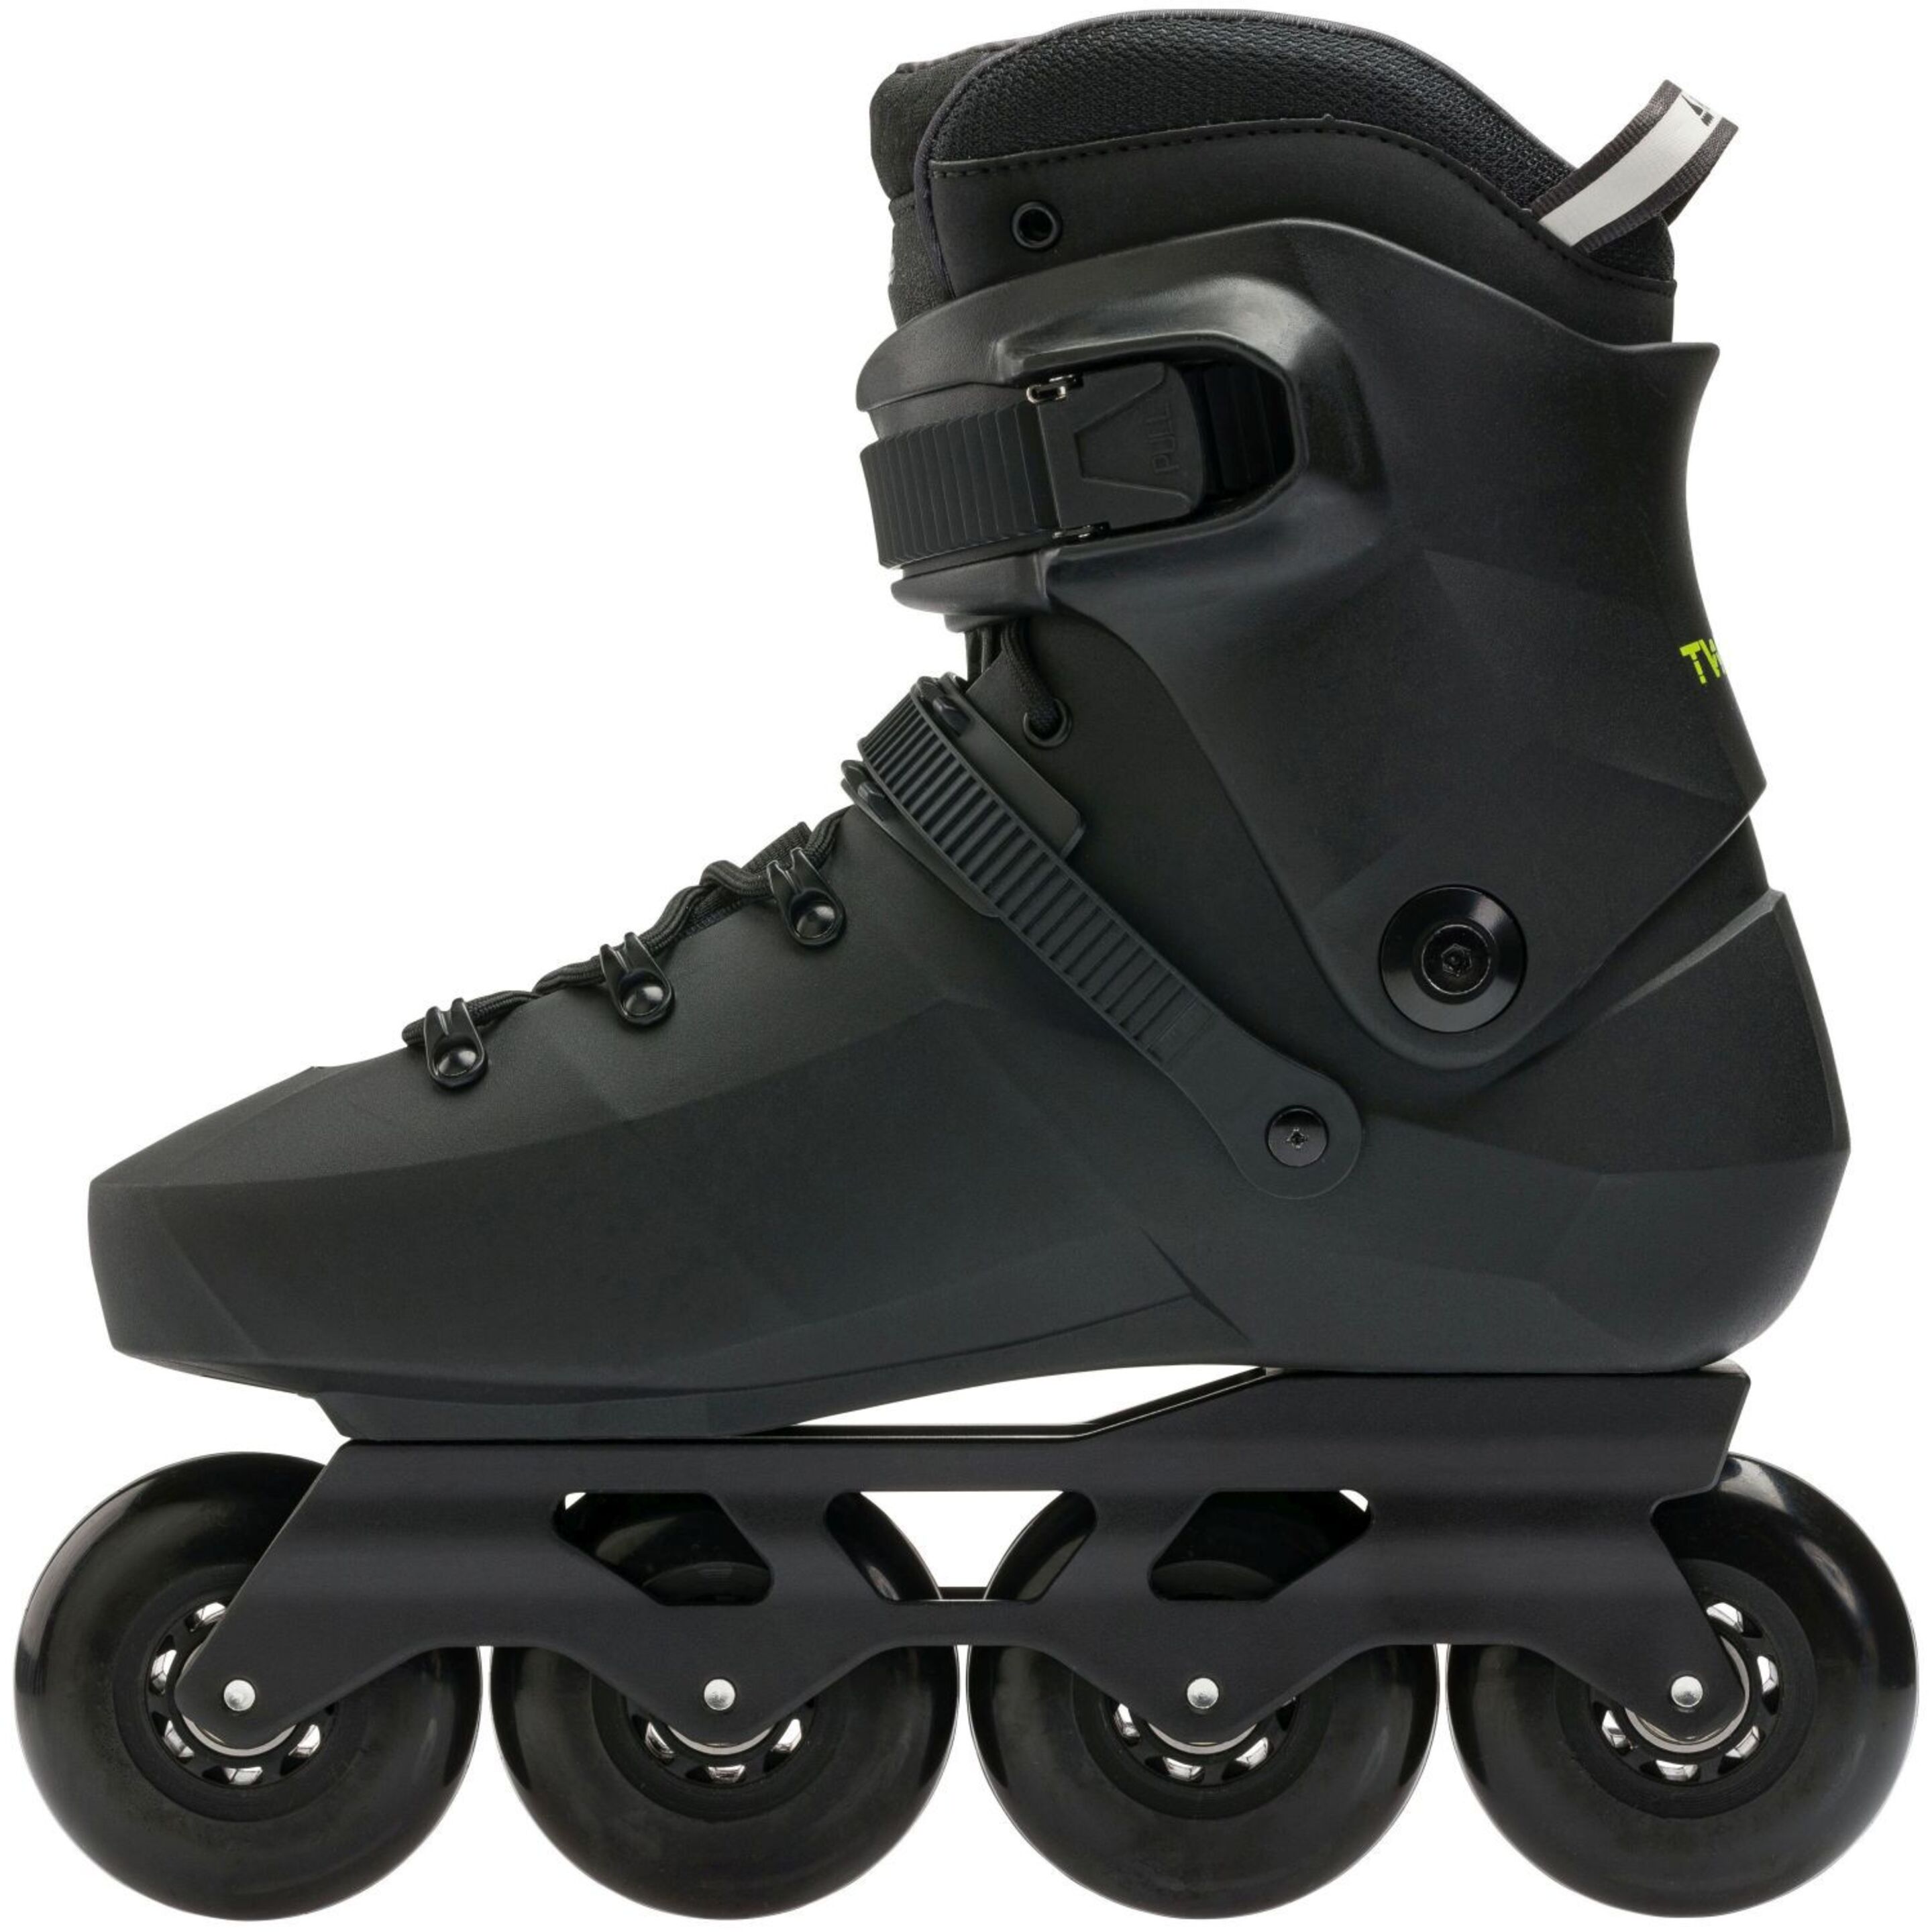 Patines Twister Xt Rollerblade